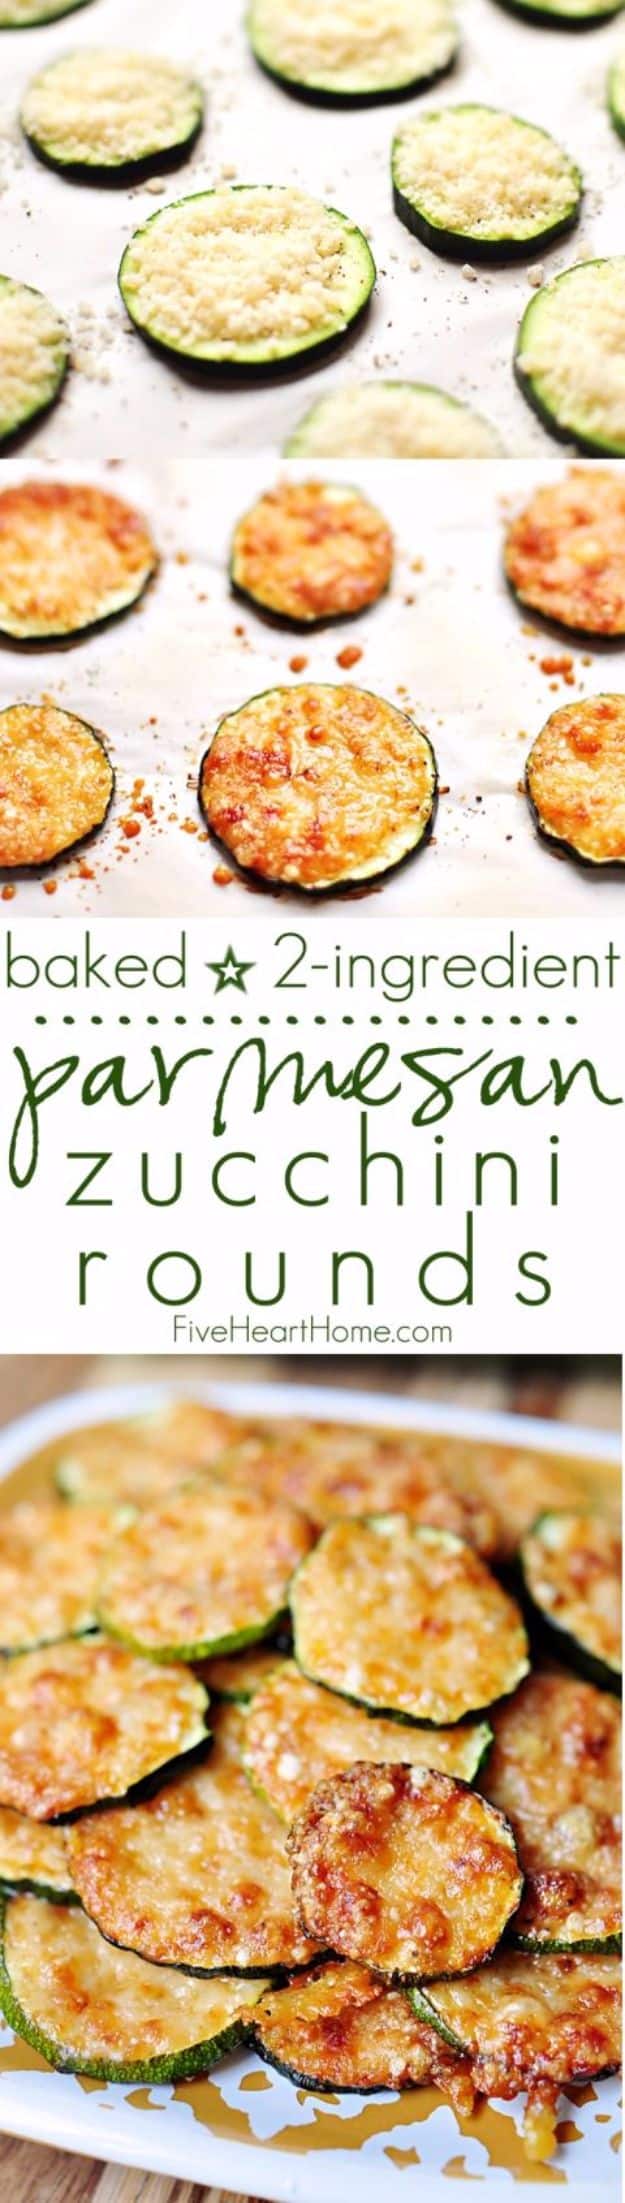 Easy Snacks You Can Make In Minutes - Baked Parmesan Zucchini Rounds - Quick Recipes and Tricks for Making After Workout and After School Snack - Fast Ideas for Instant Small Meals and Treats - No Bake, Microwave and Simple Prep Makes Snacking Fun #snacks #recipes